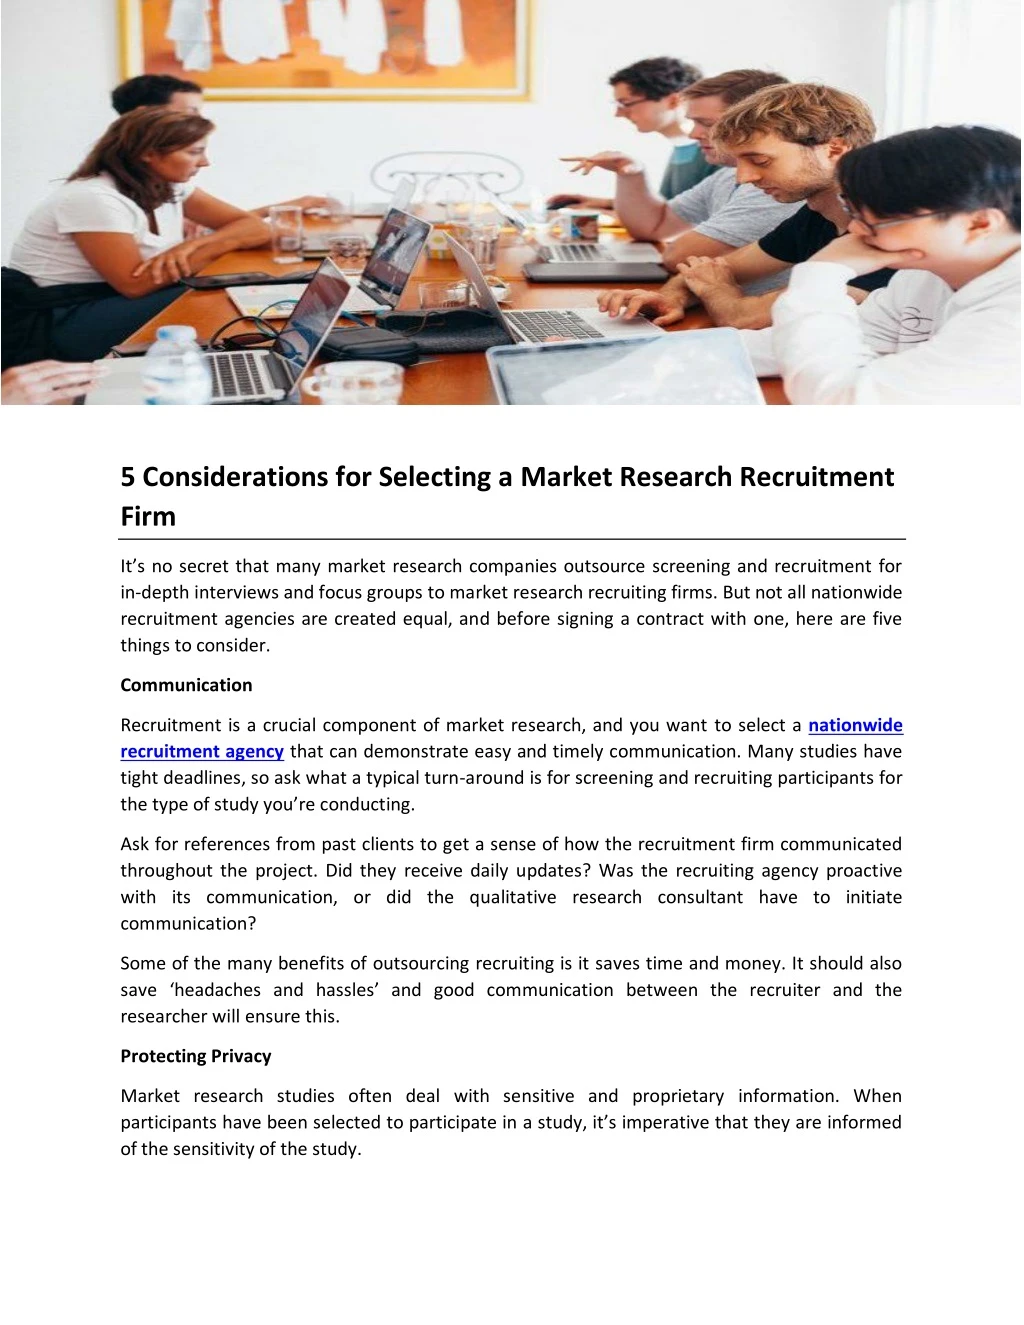 5 considerations for selecting a market research